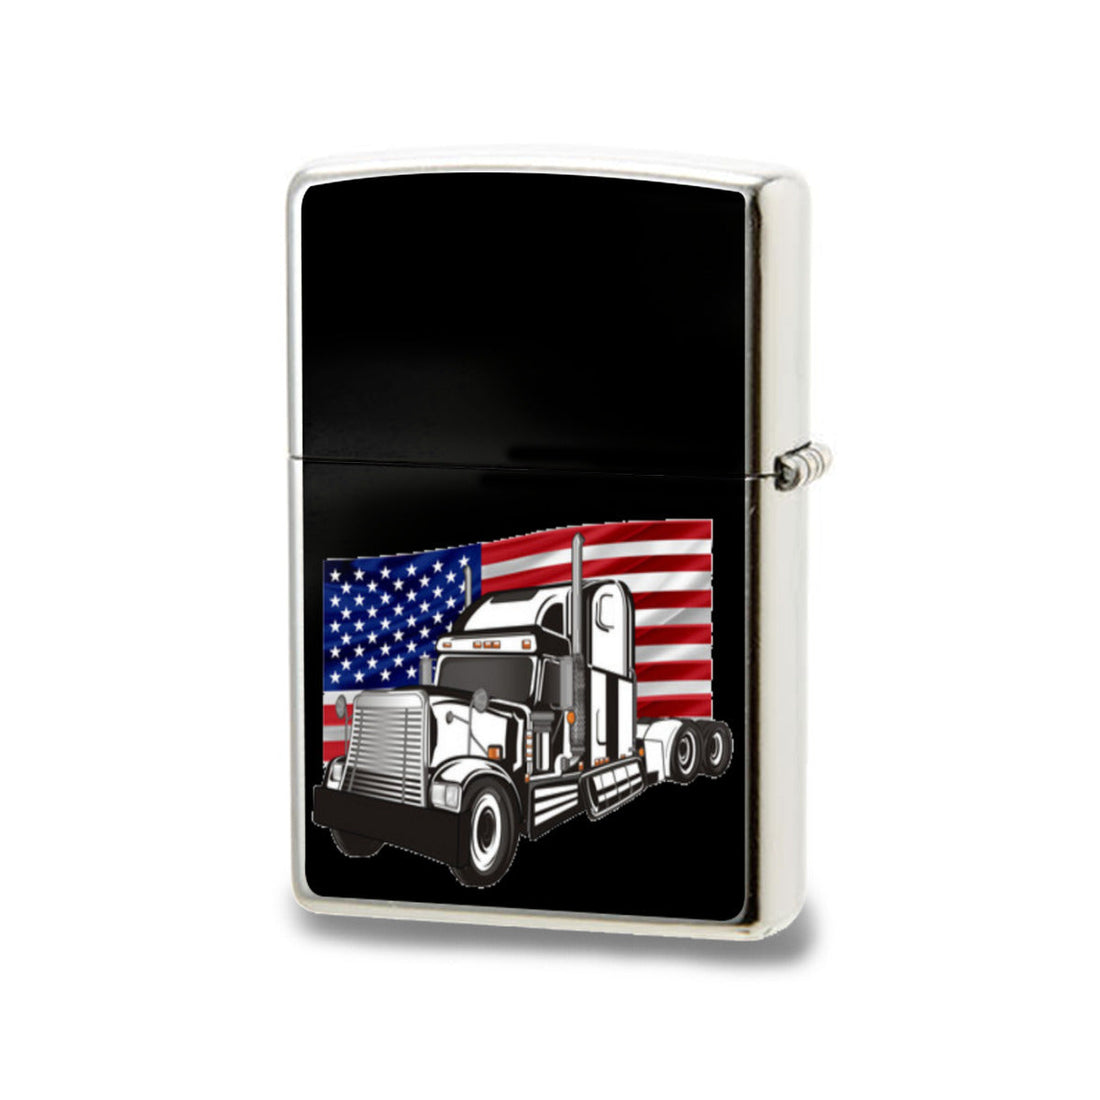 Rugged Elegance: Elevate Your Style with our Premium Aluminum American Truck Lighter Case Home-clothes-jewelry